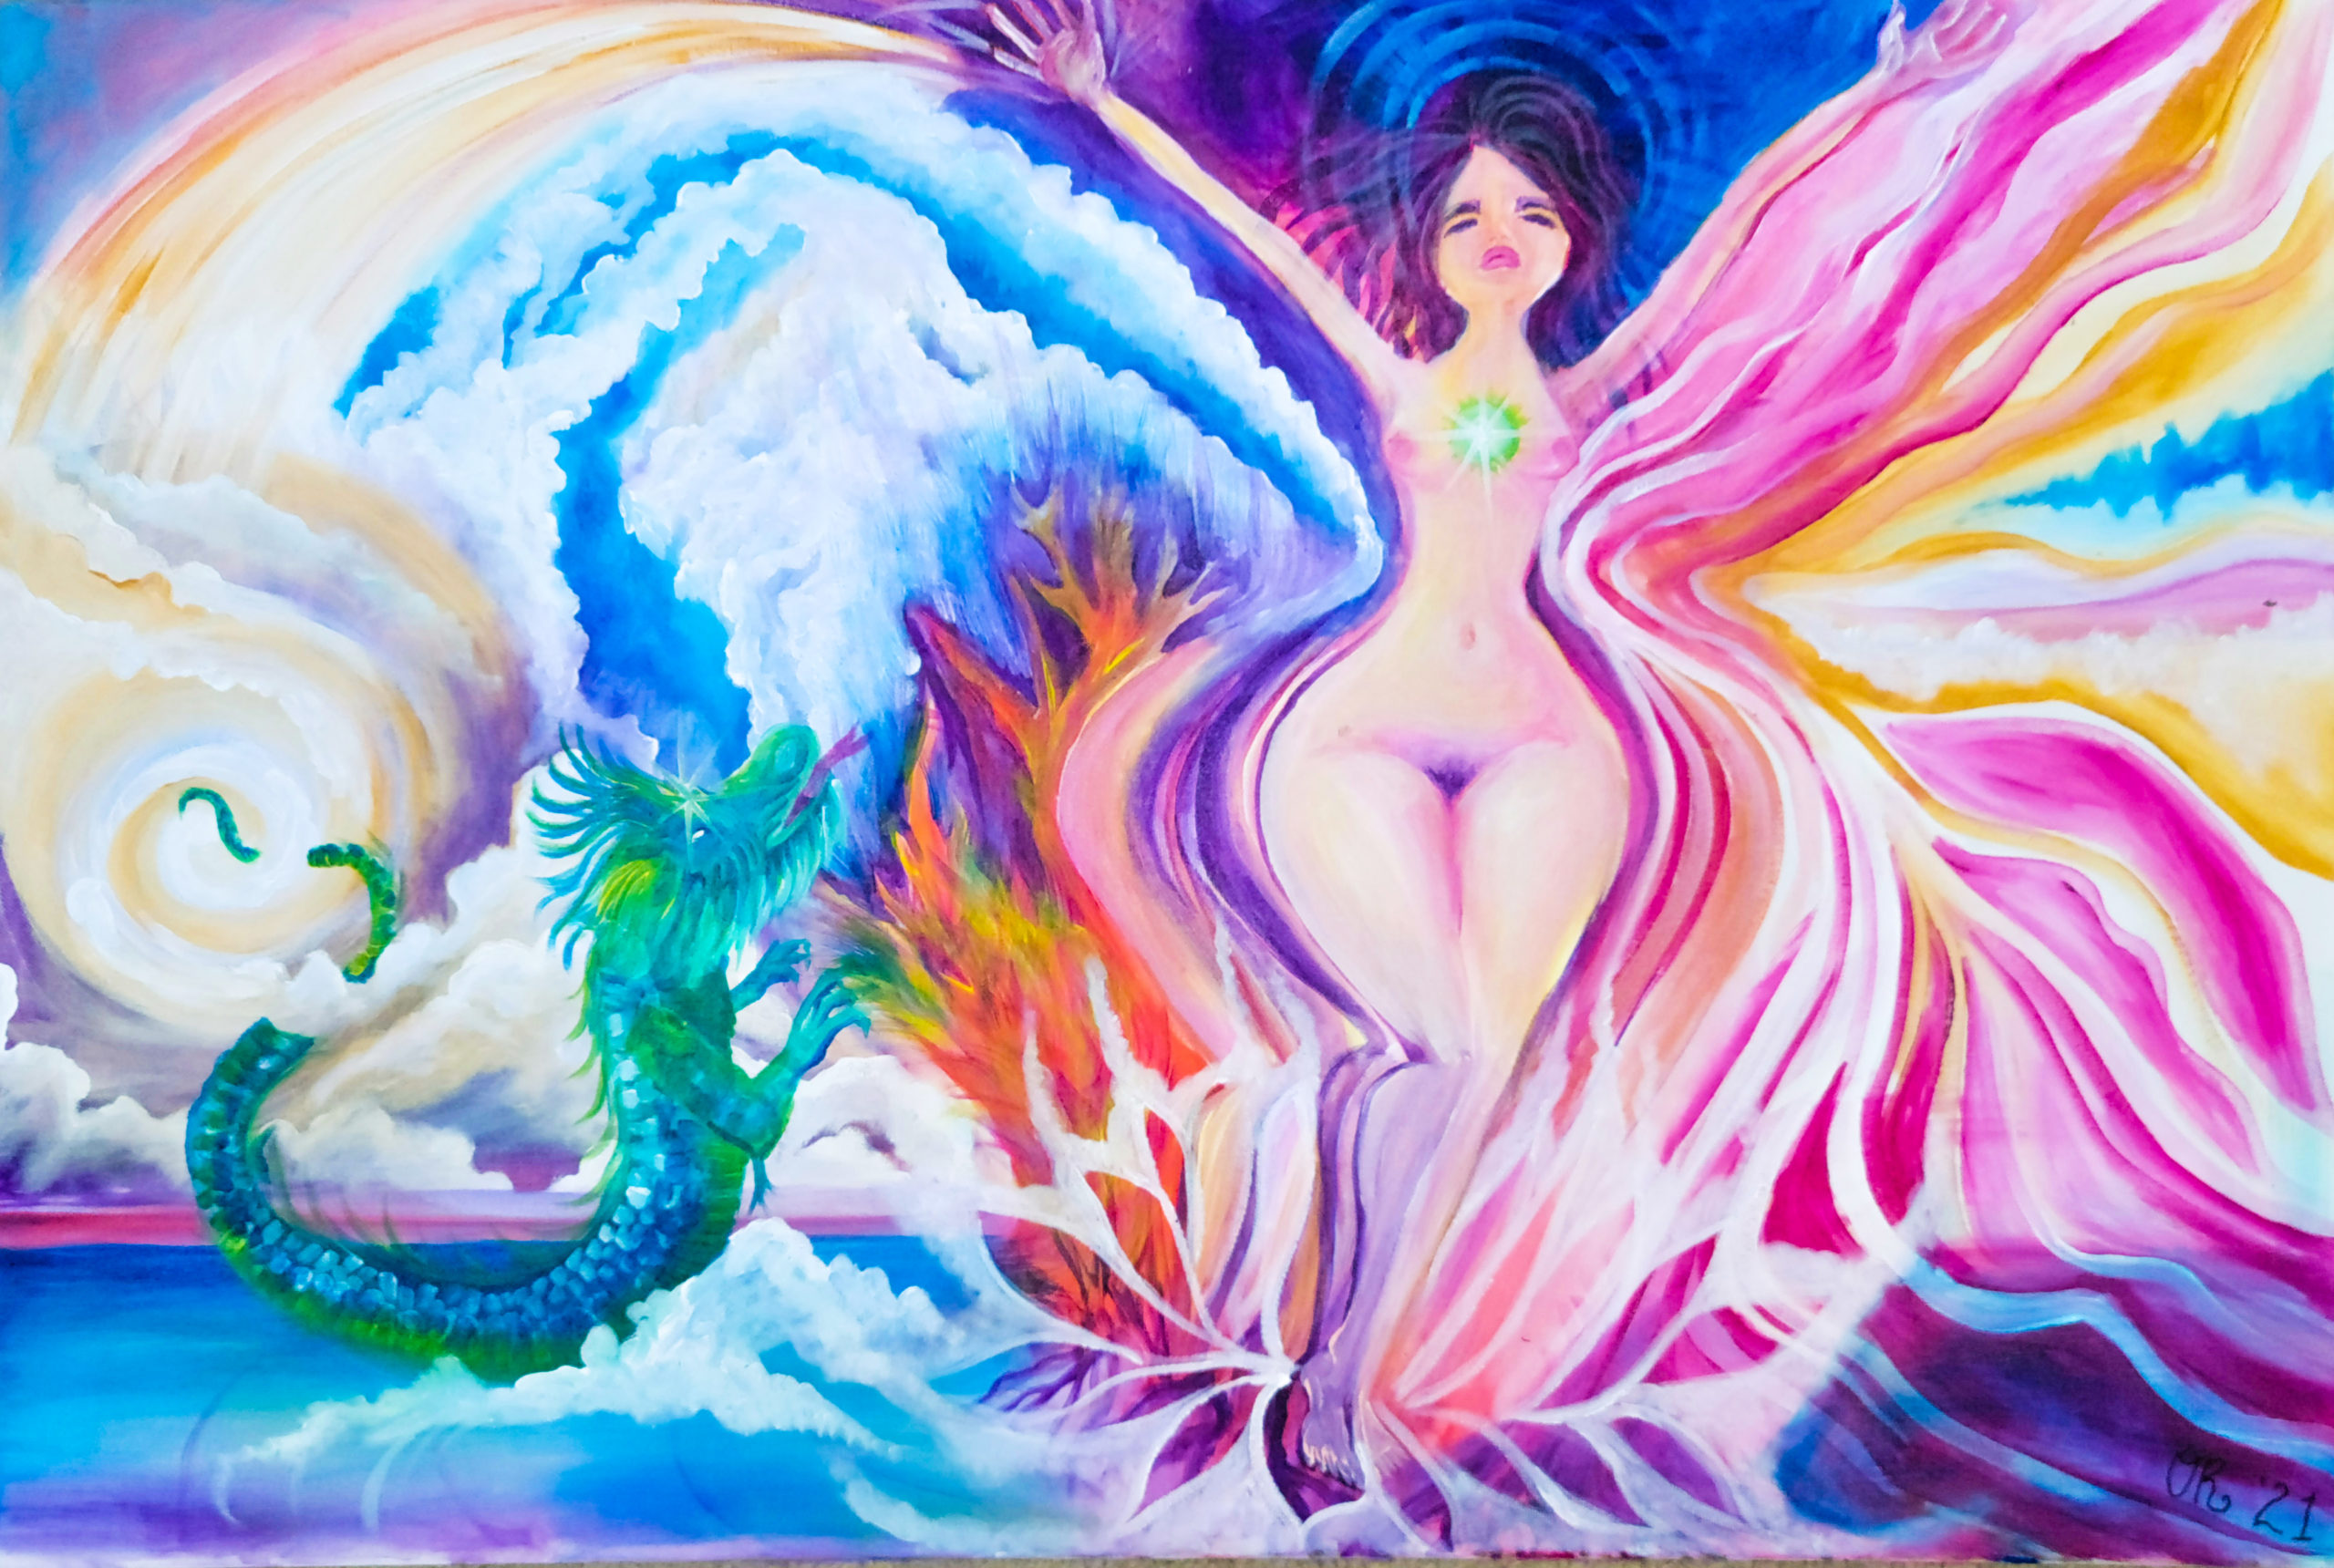 Painting of a nude light skinned woman with brown hair stretching her arms out. She is surrounded by colorful waves and a small green dragon on the left of the image. 